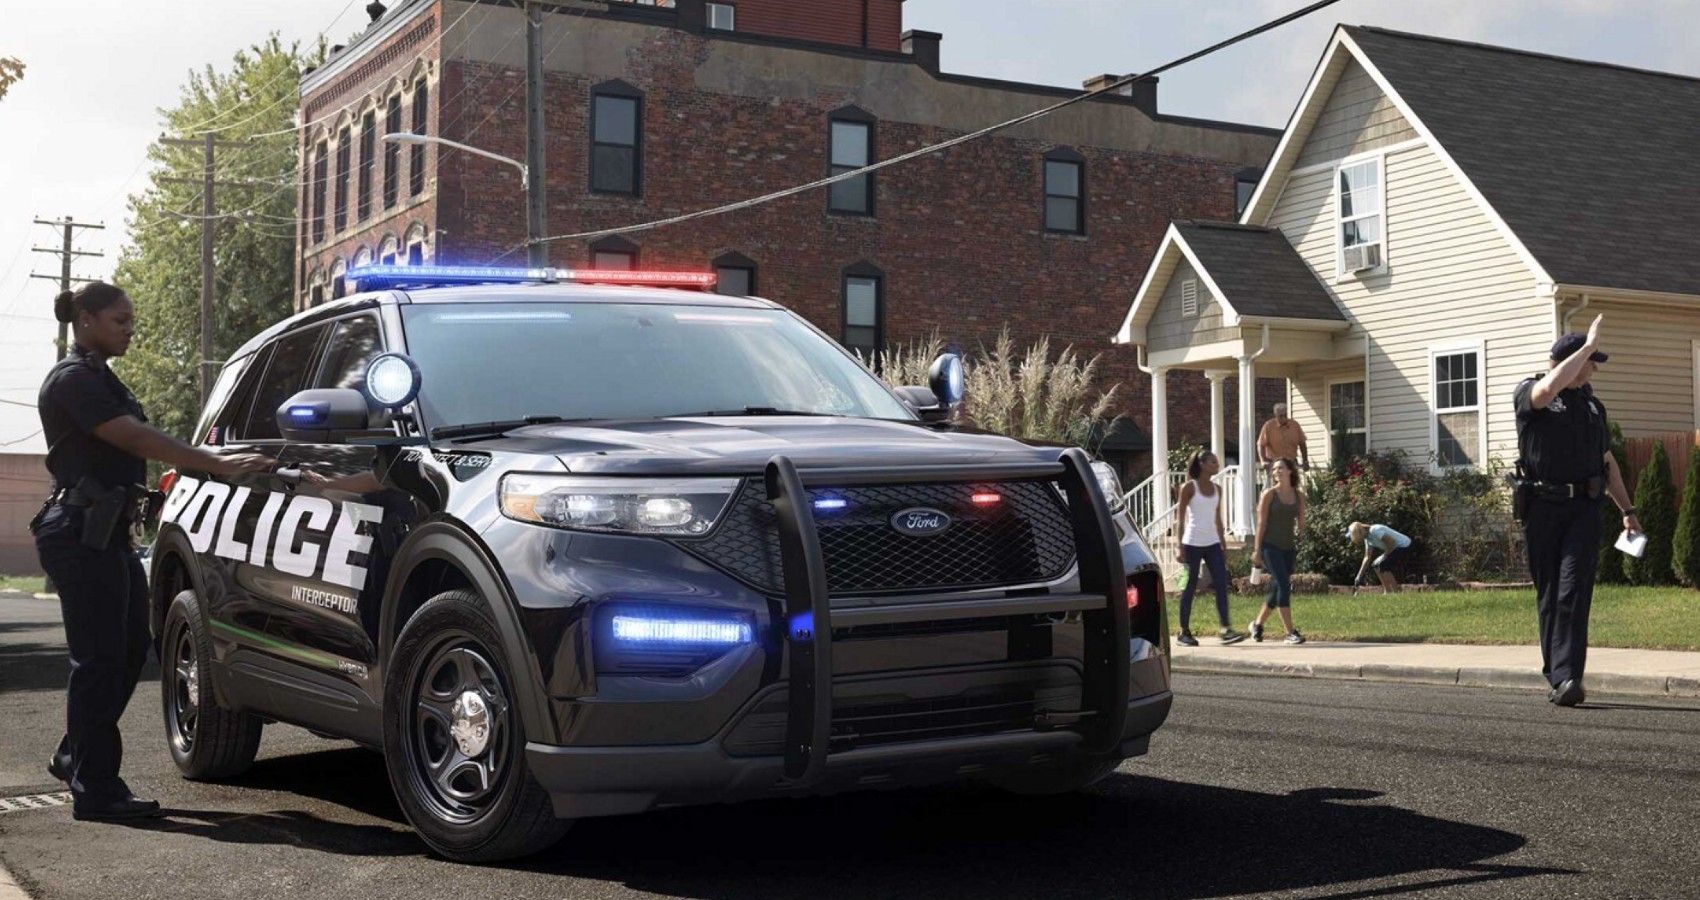 Officers with Ford Police Interceptor Utility 